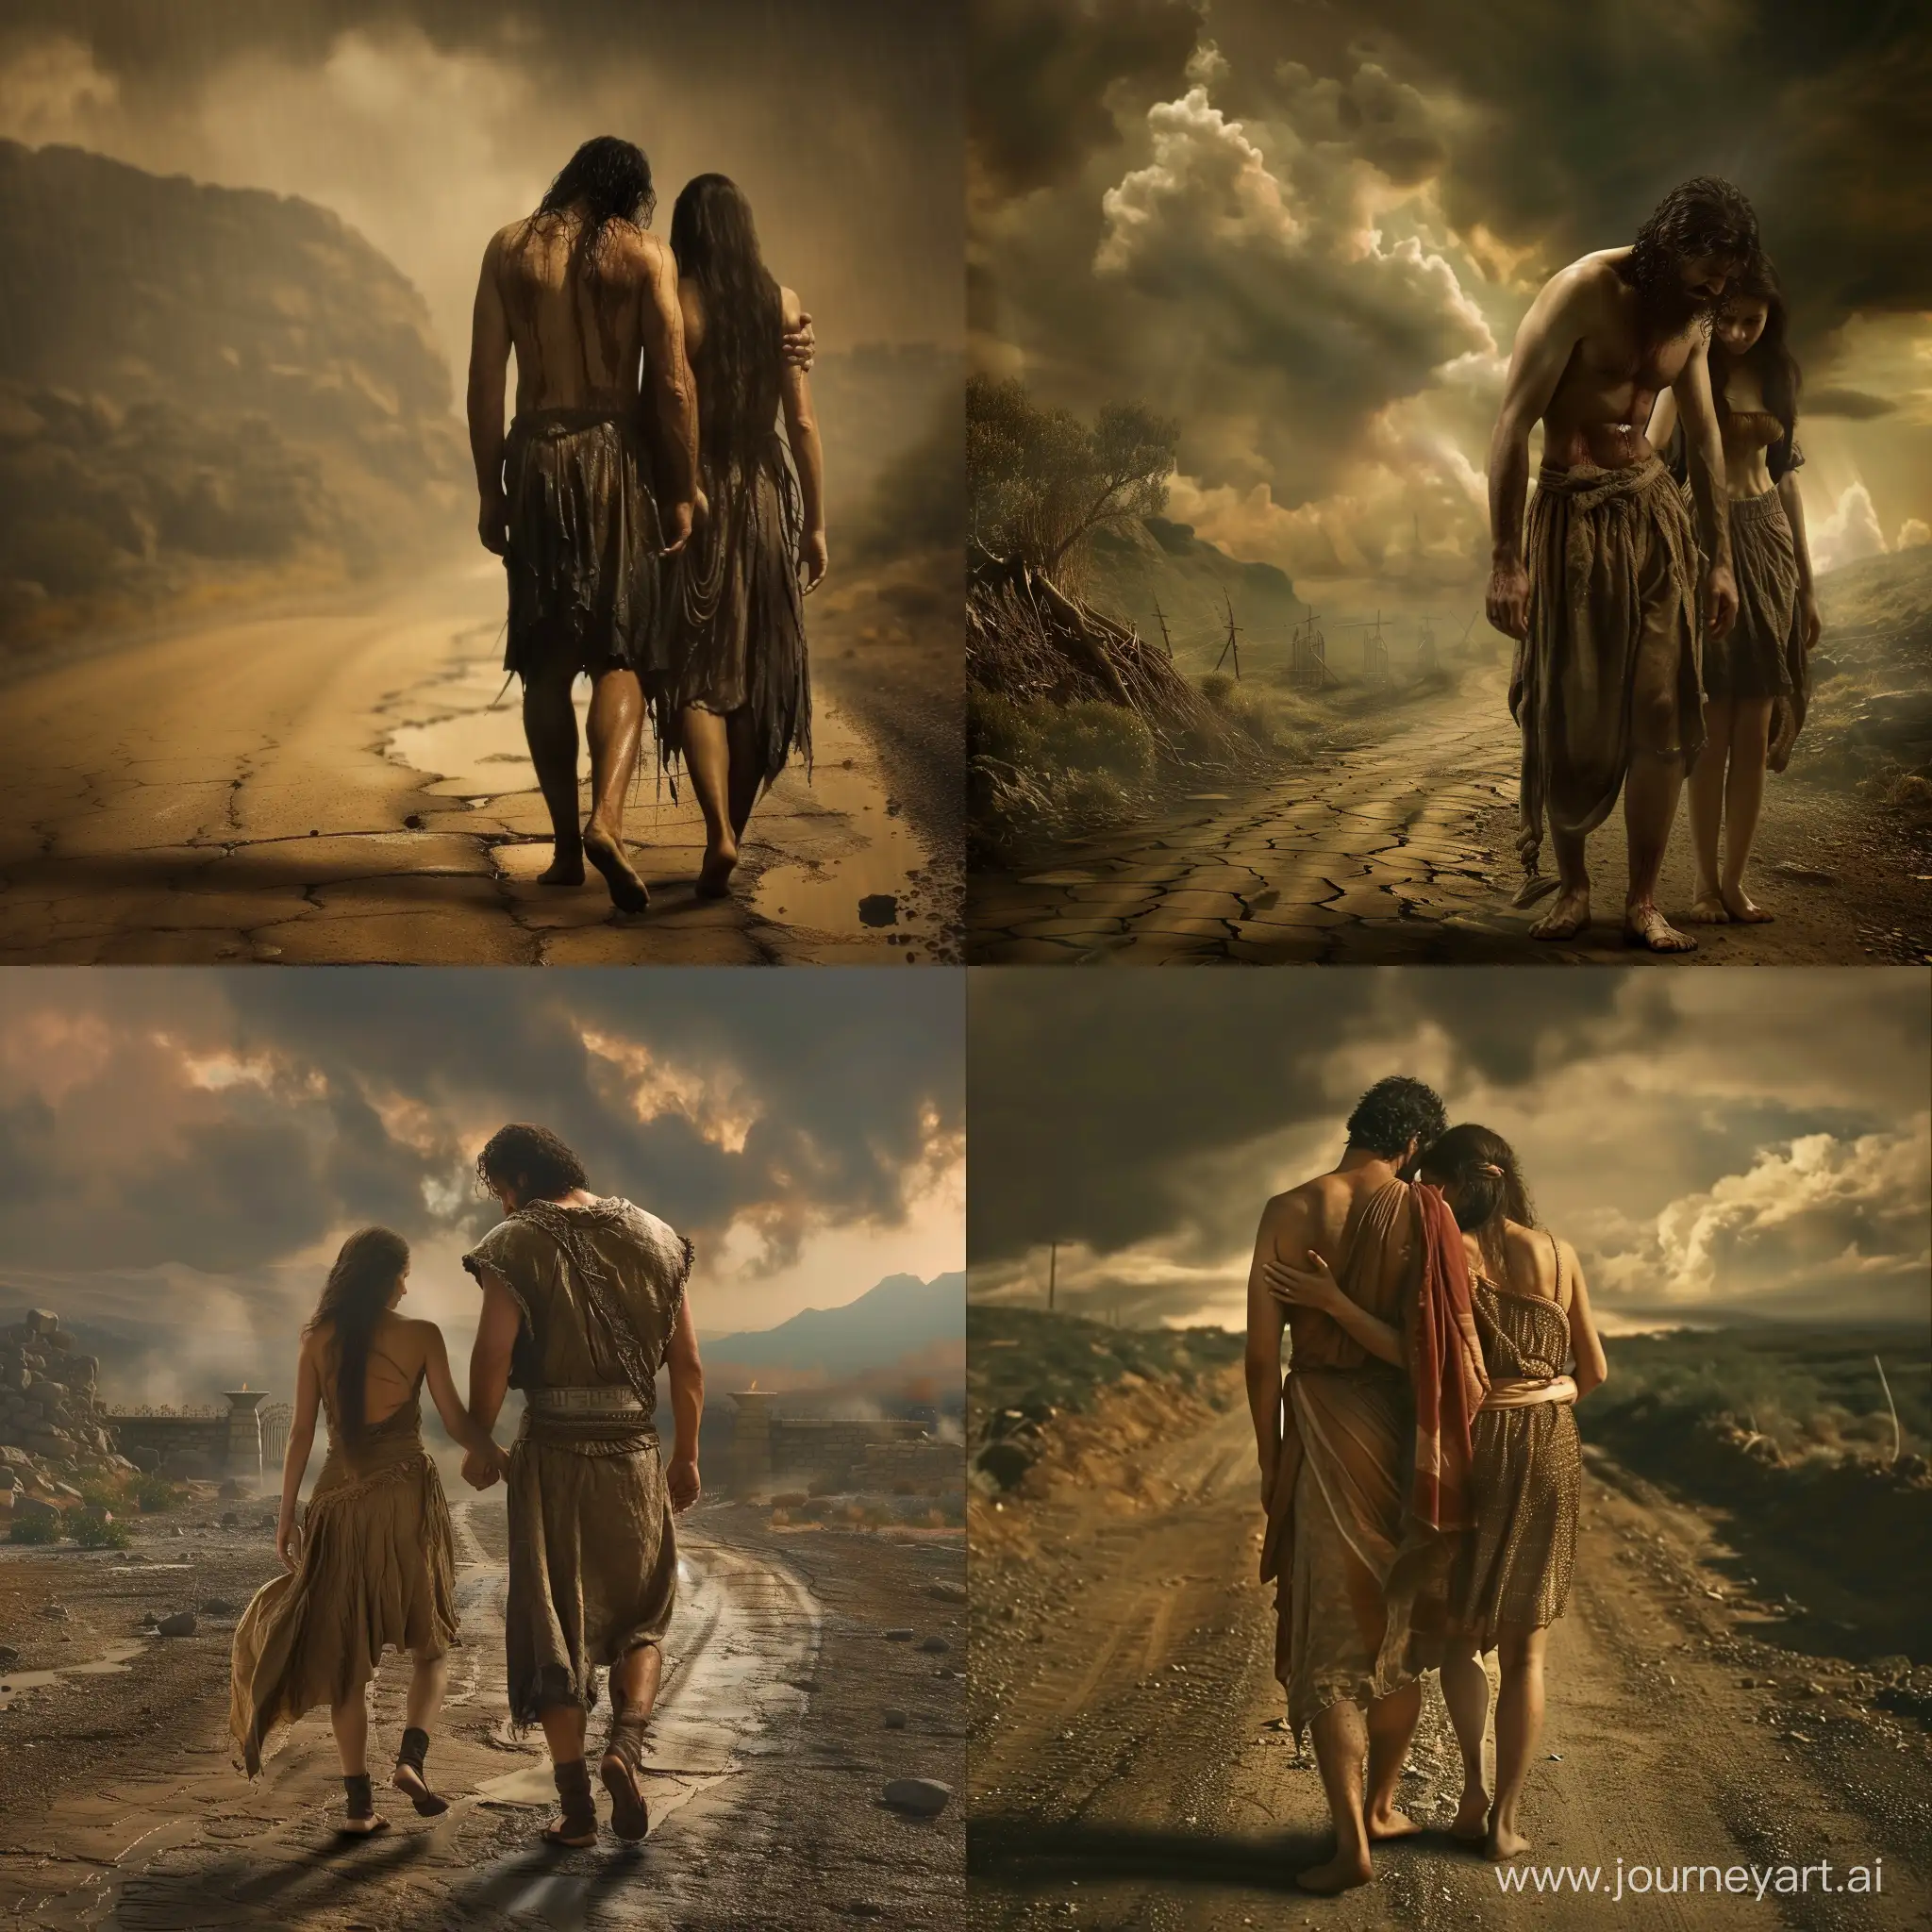 A beautiful image of Adam and Eve sad and crying walking on a barren road outside the gates of paradise